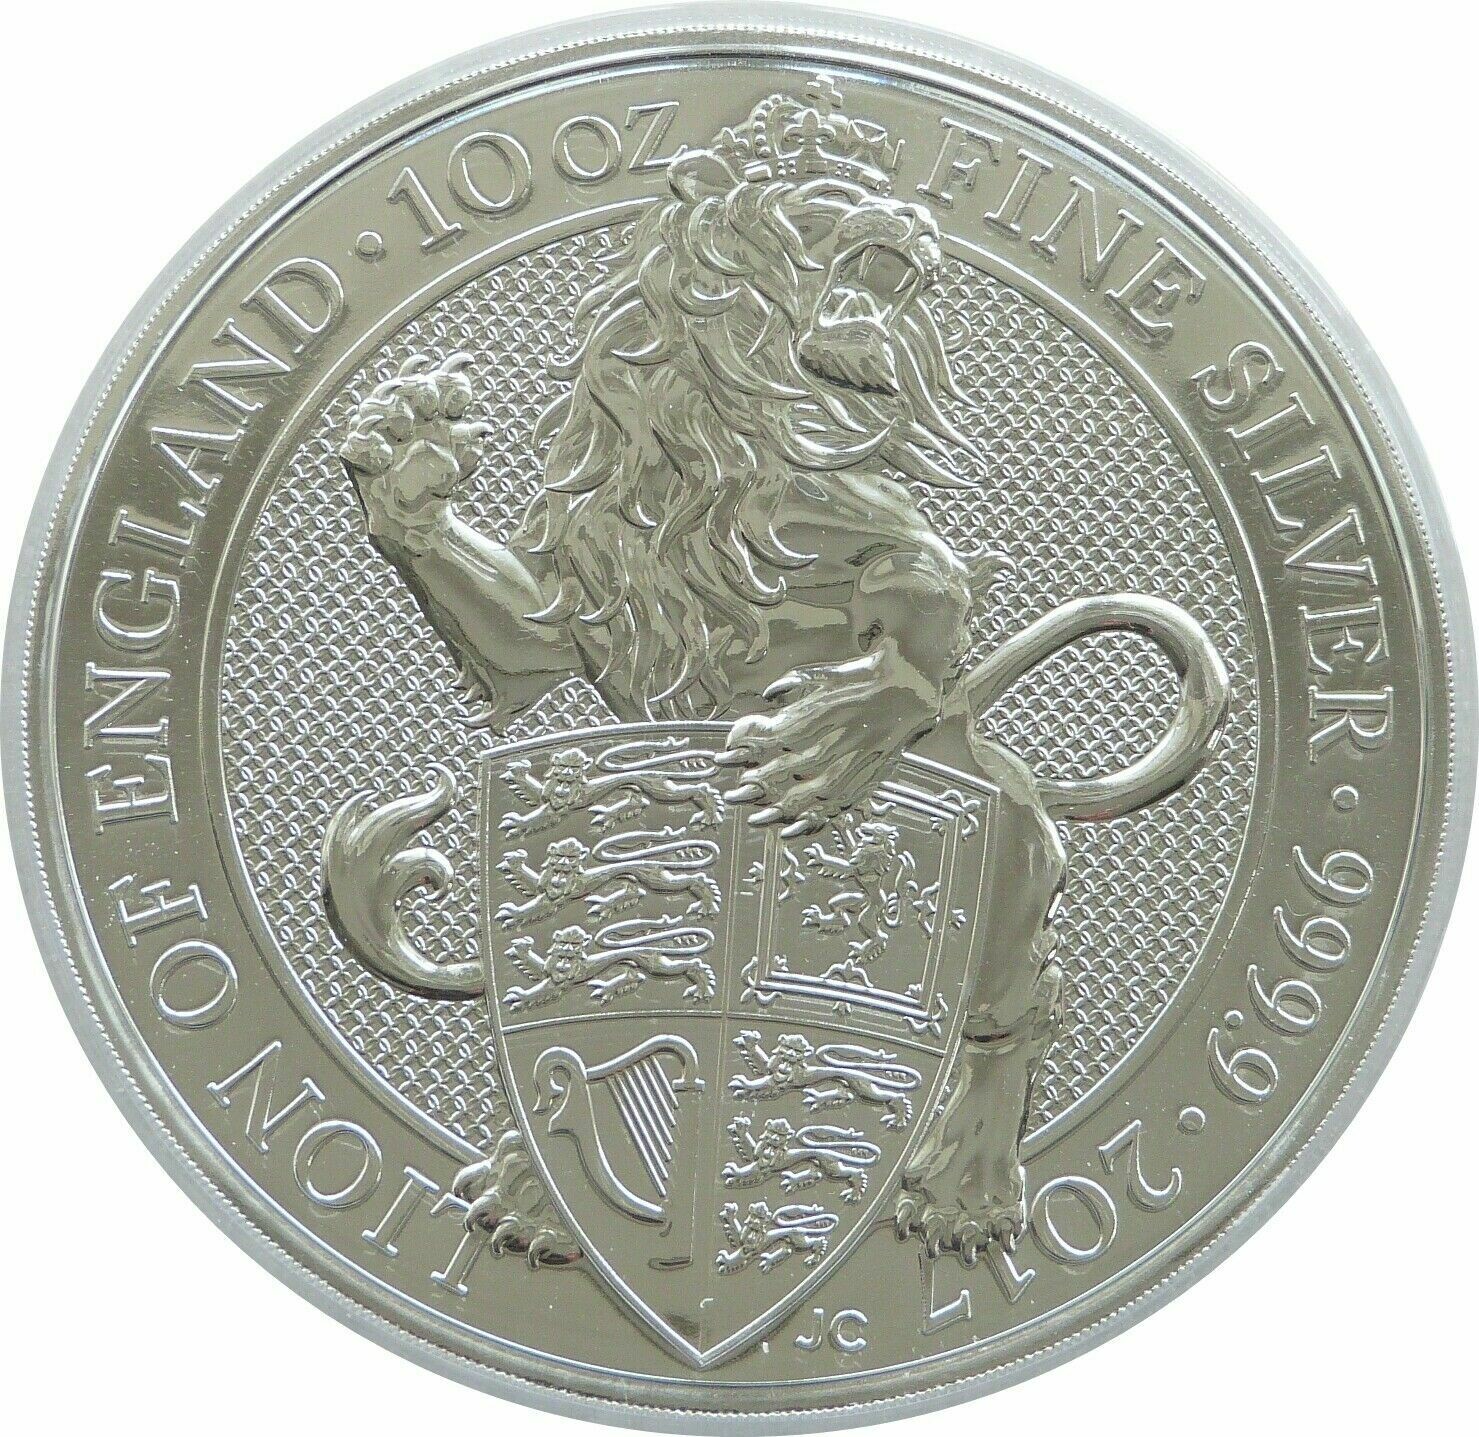 2017 Queens Beasts Lion of England £10 Silver 10oz Coin